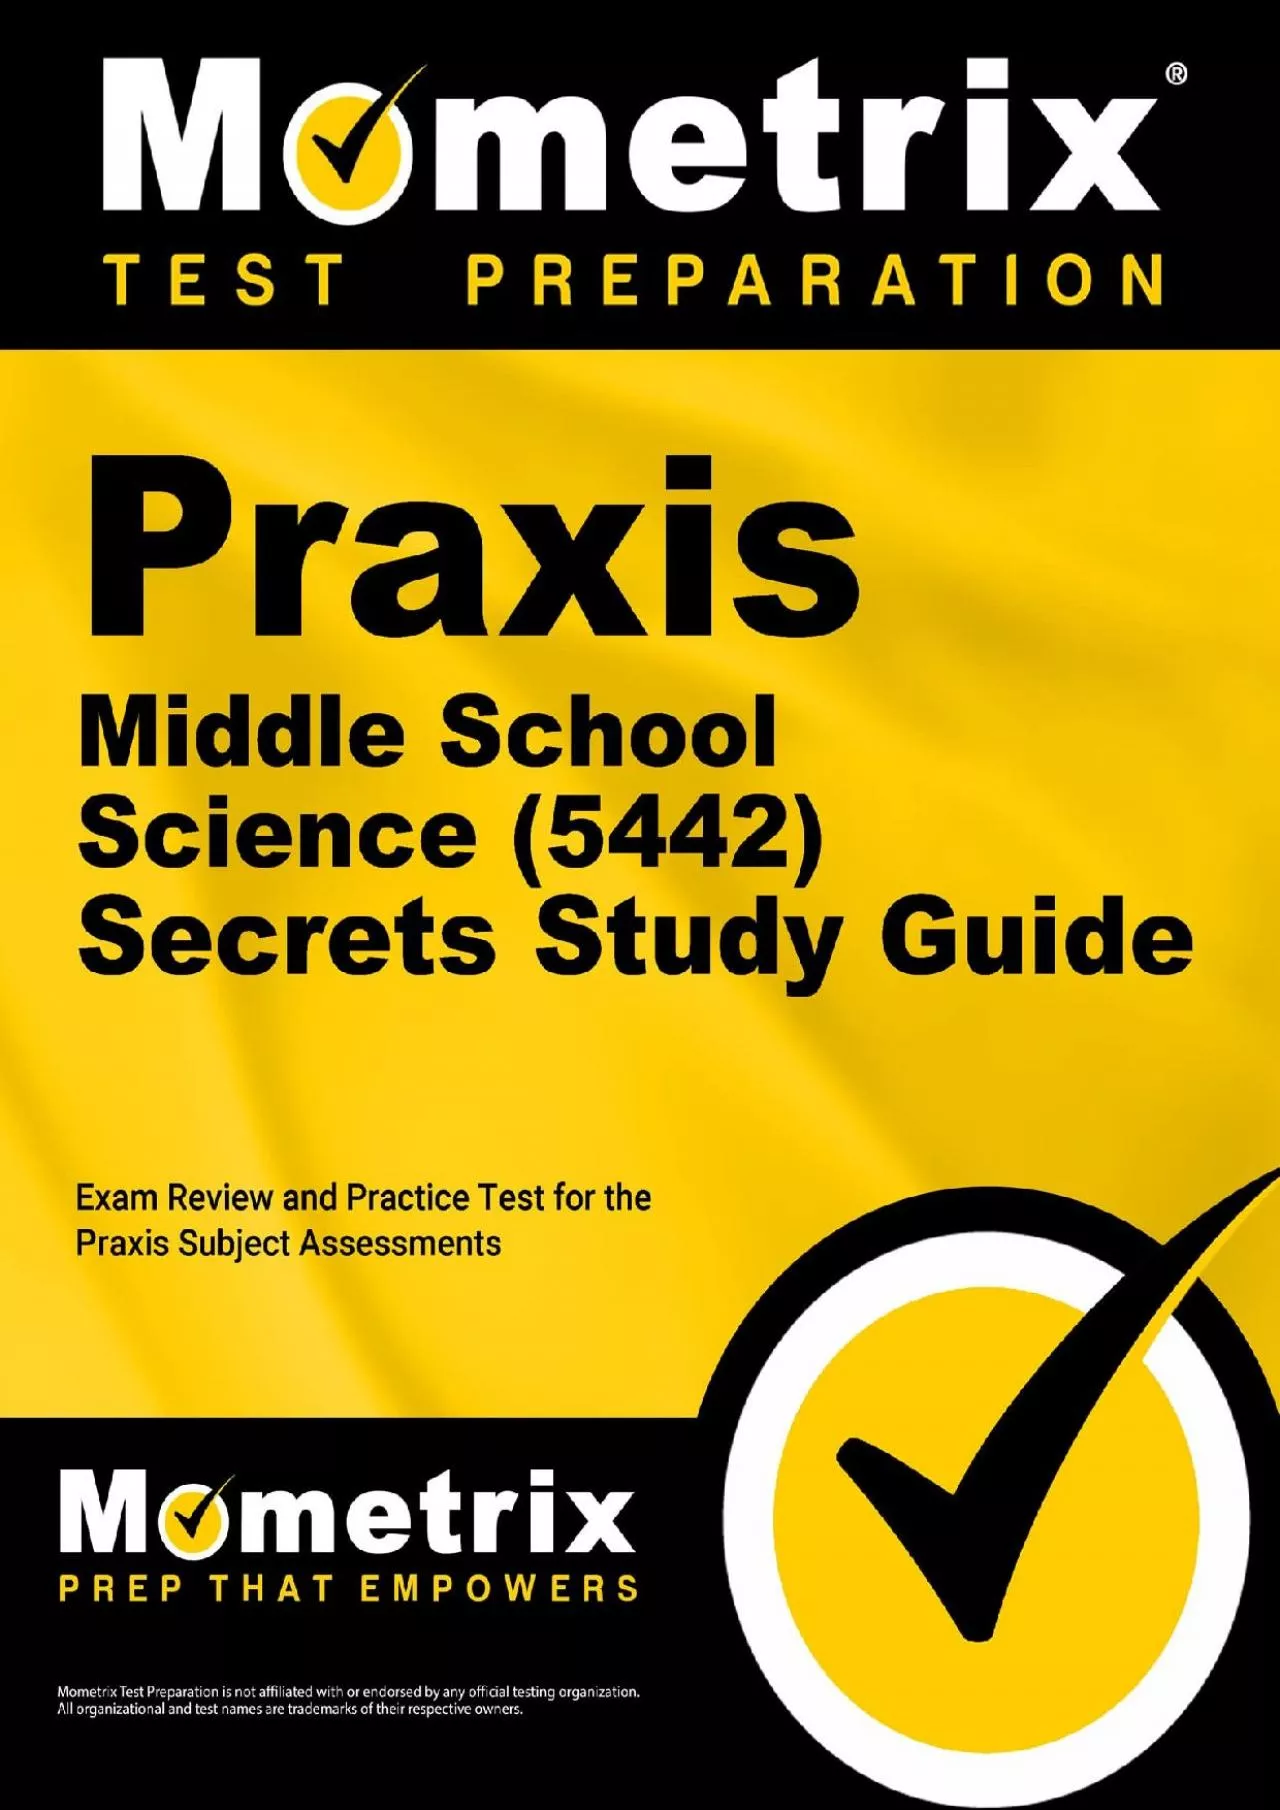 [READ] Praxis Middle School Science 5442 Secrets Study Guide: Exam Review and Practice